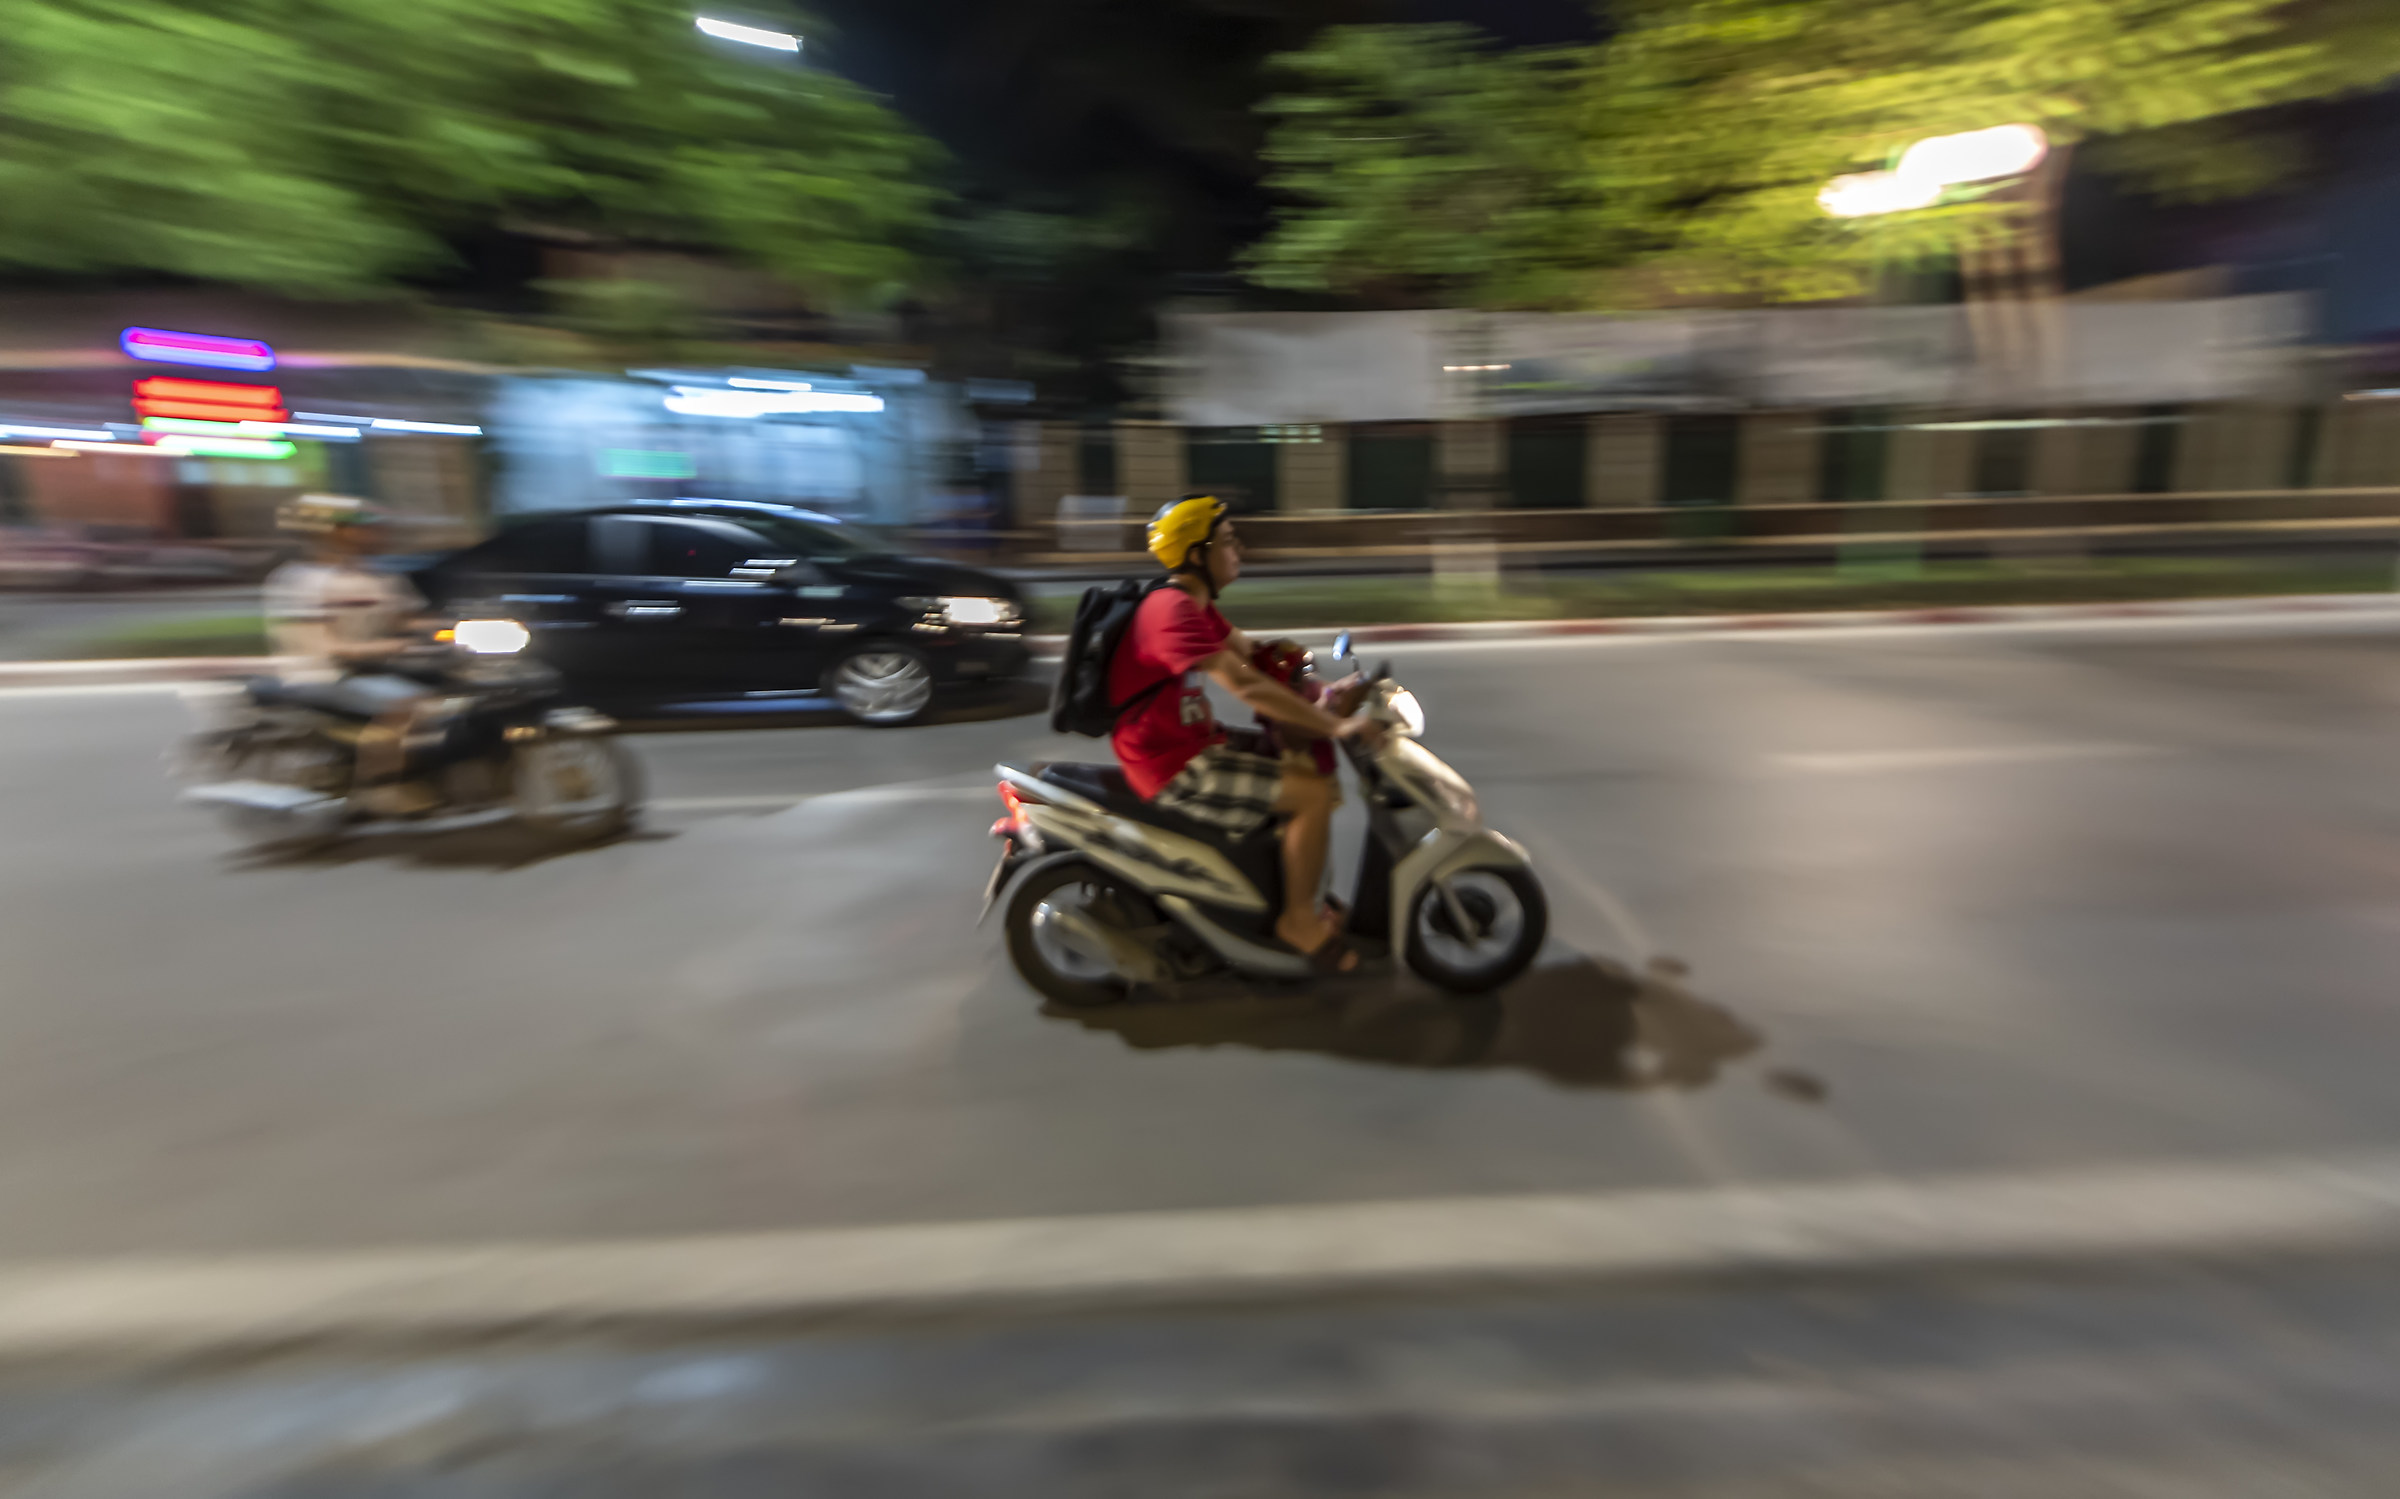 Hanoi-the City of scooters...